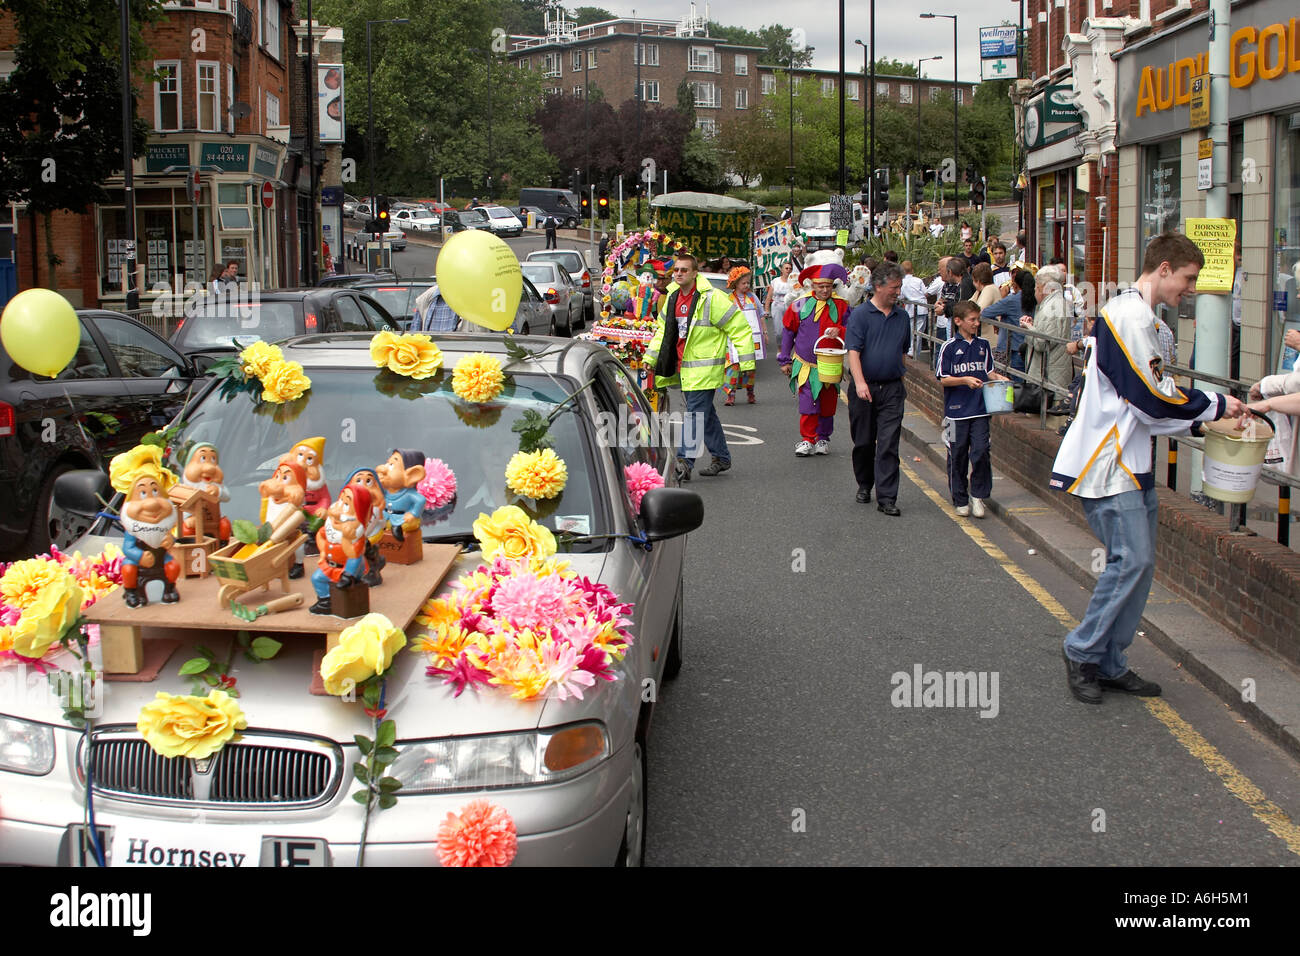 Hornsey Carnival parade through streets of Muswell Hill London N10 England Stock Photo